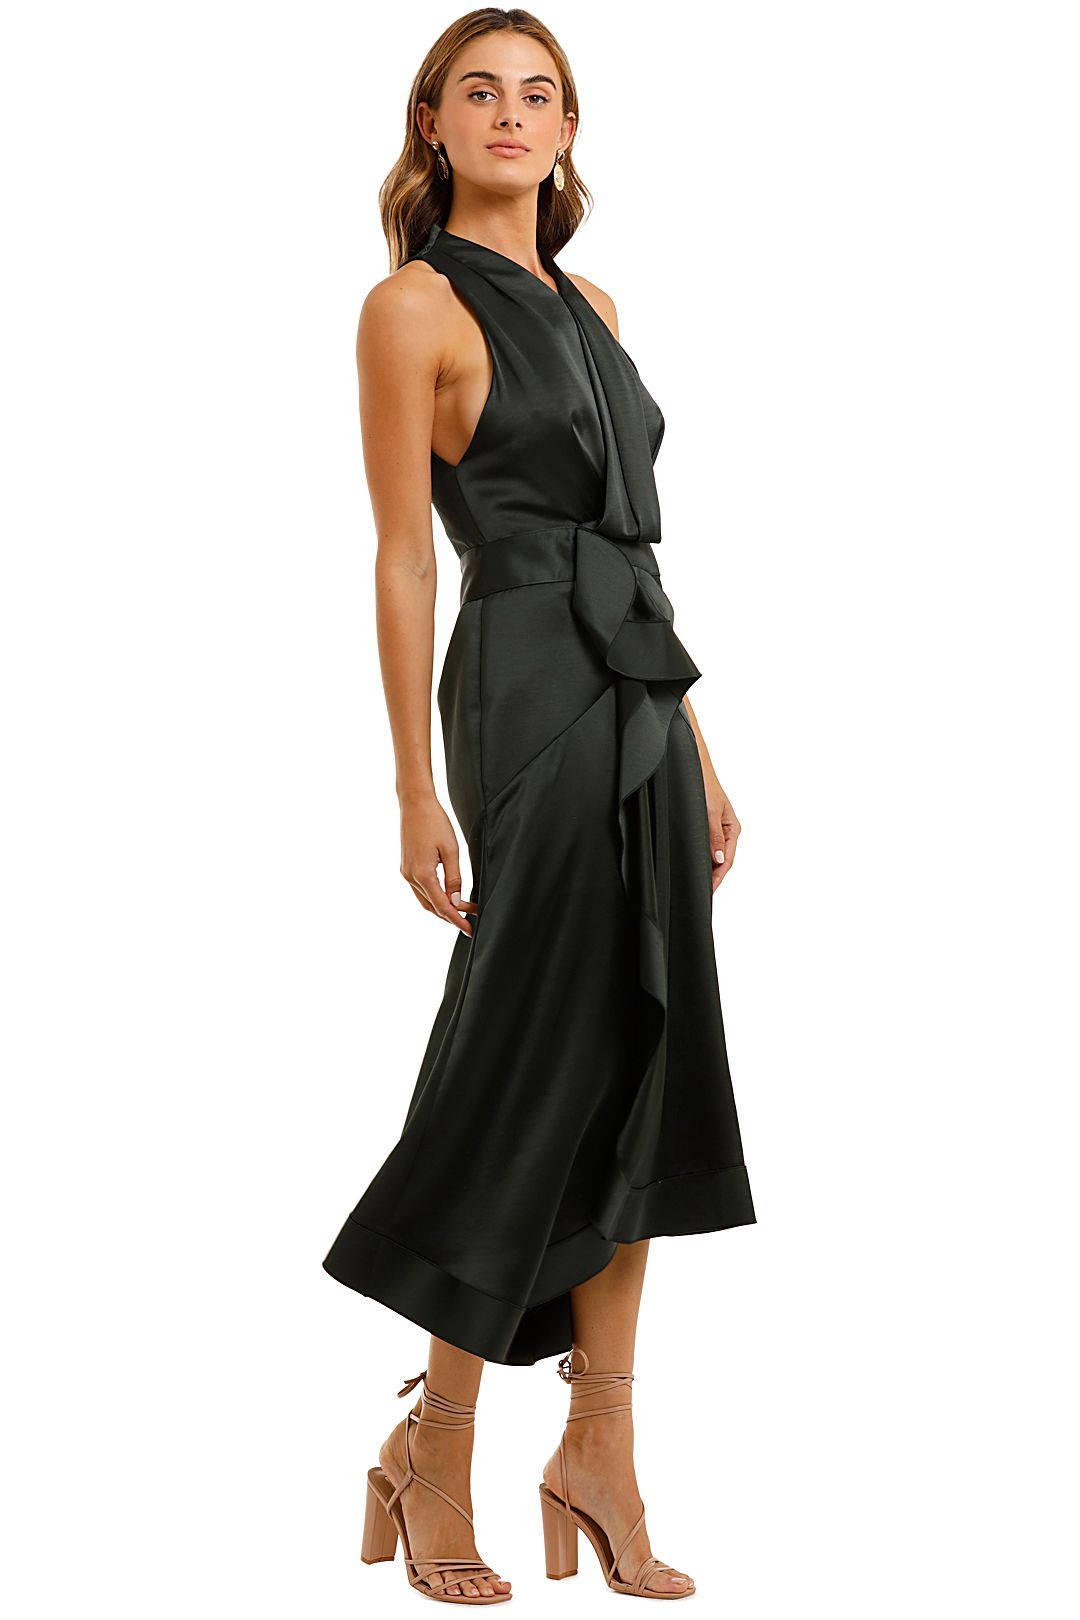 Acler Millbank Dress Forest Green Draped